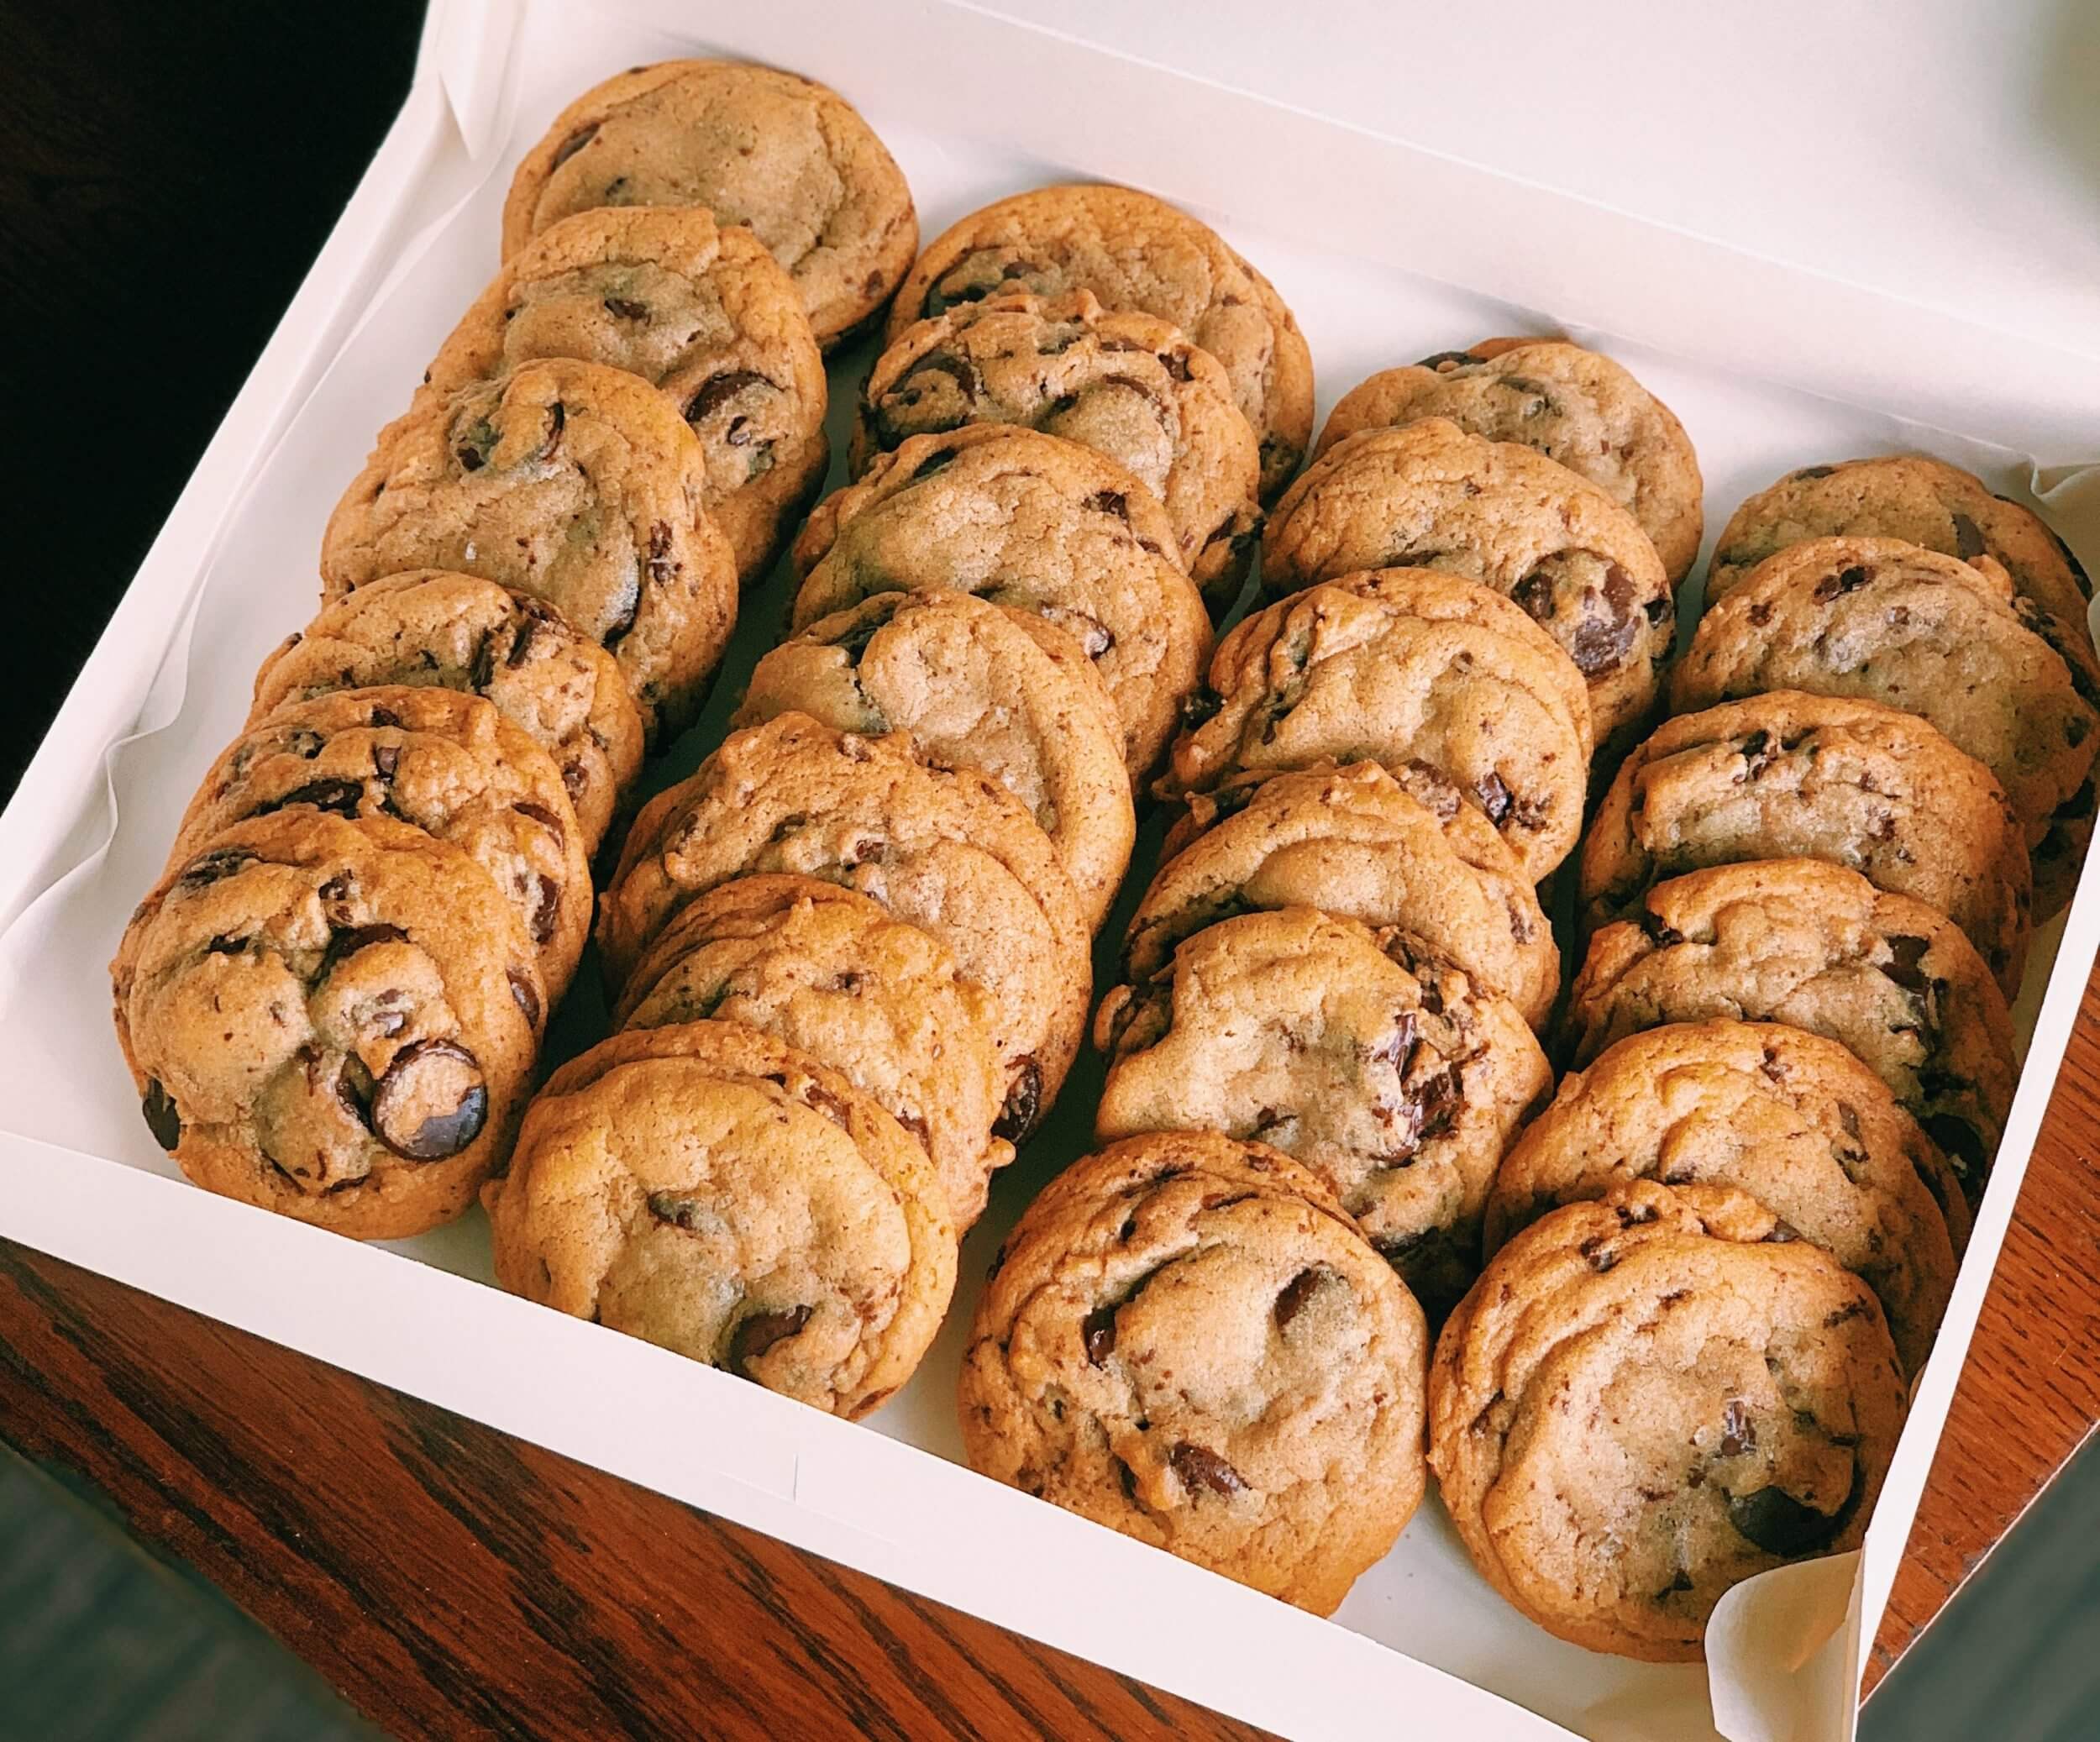 Gift your free cookie dough to teachers or volunteers as a Thank You.